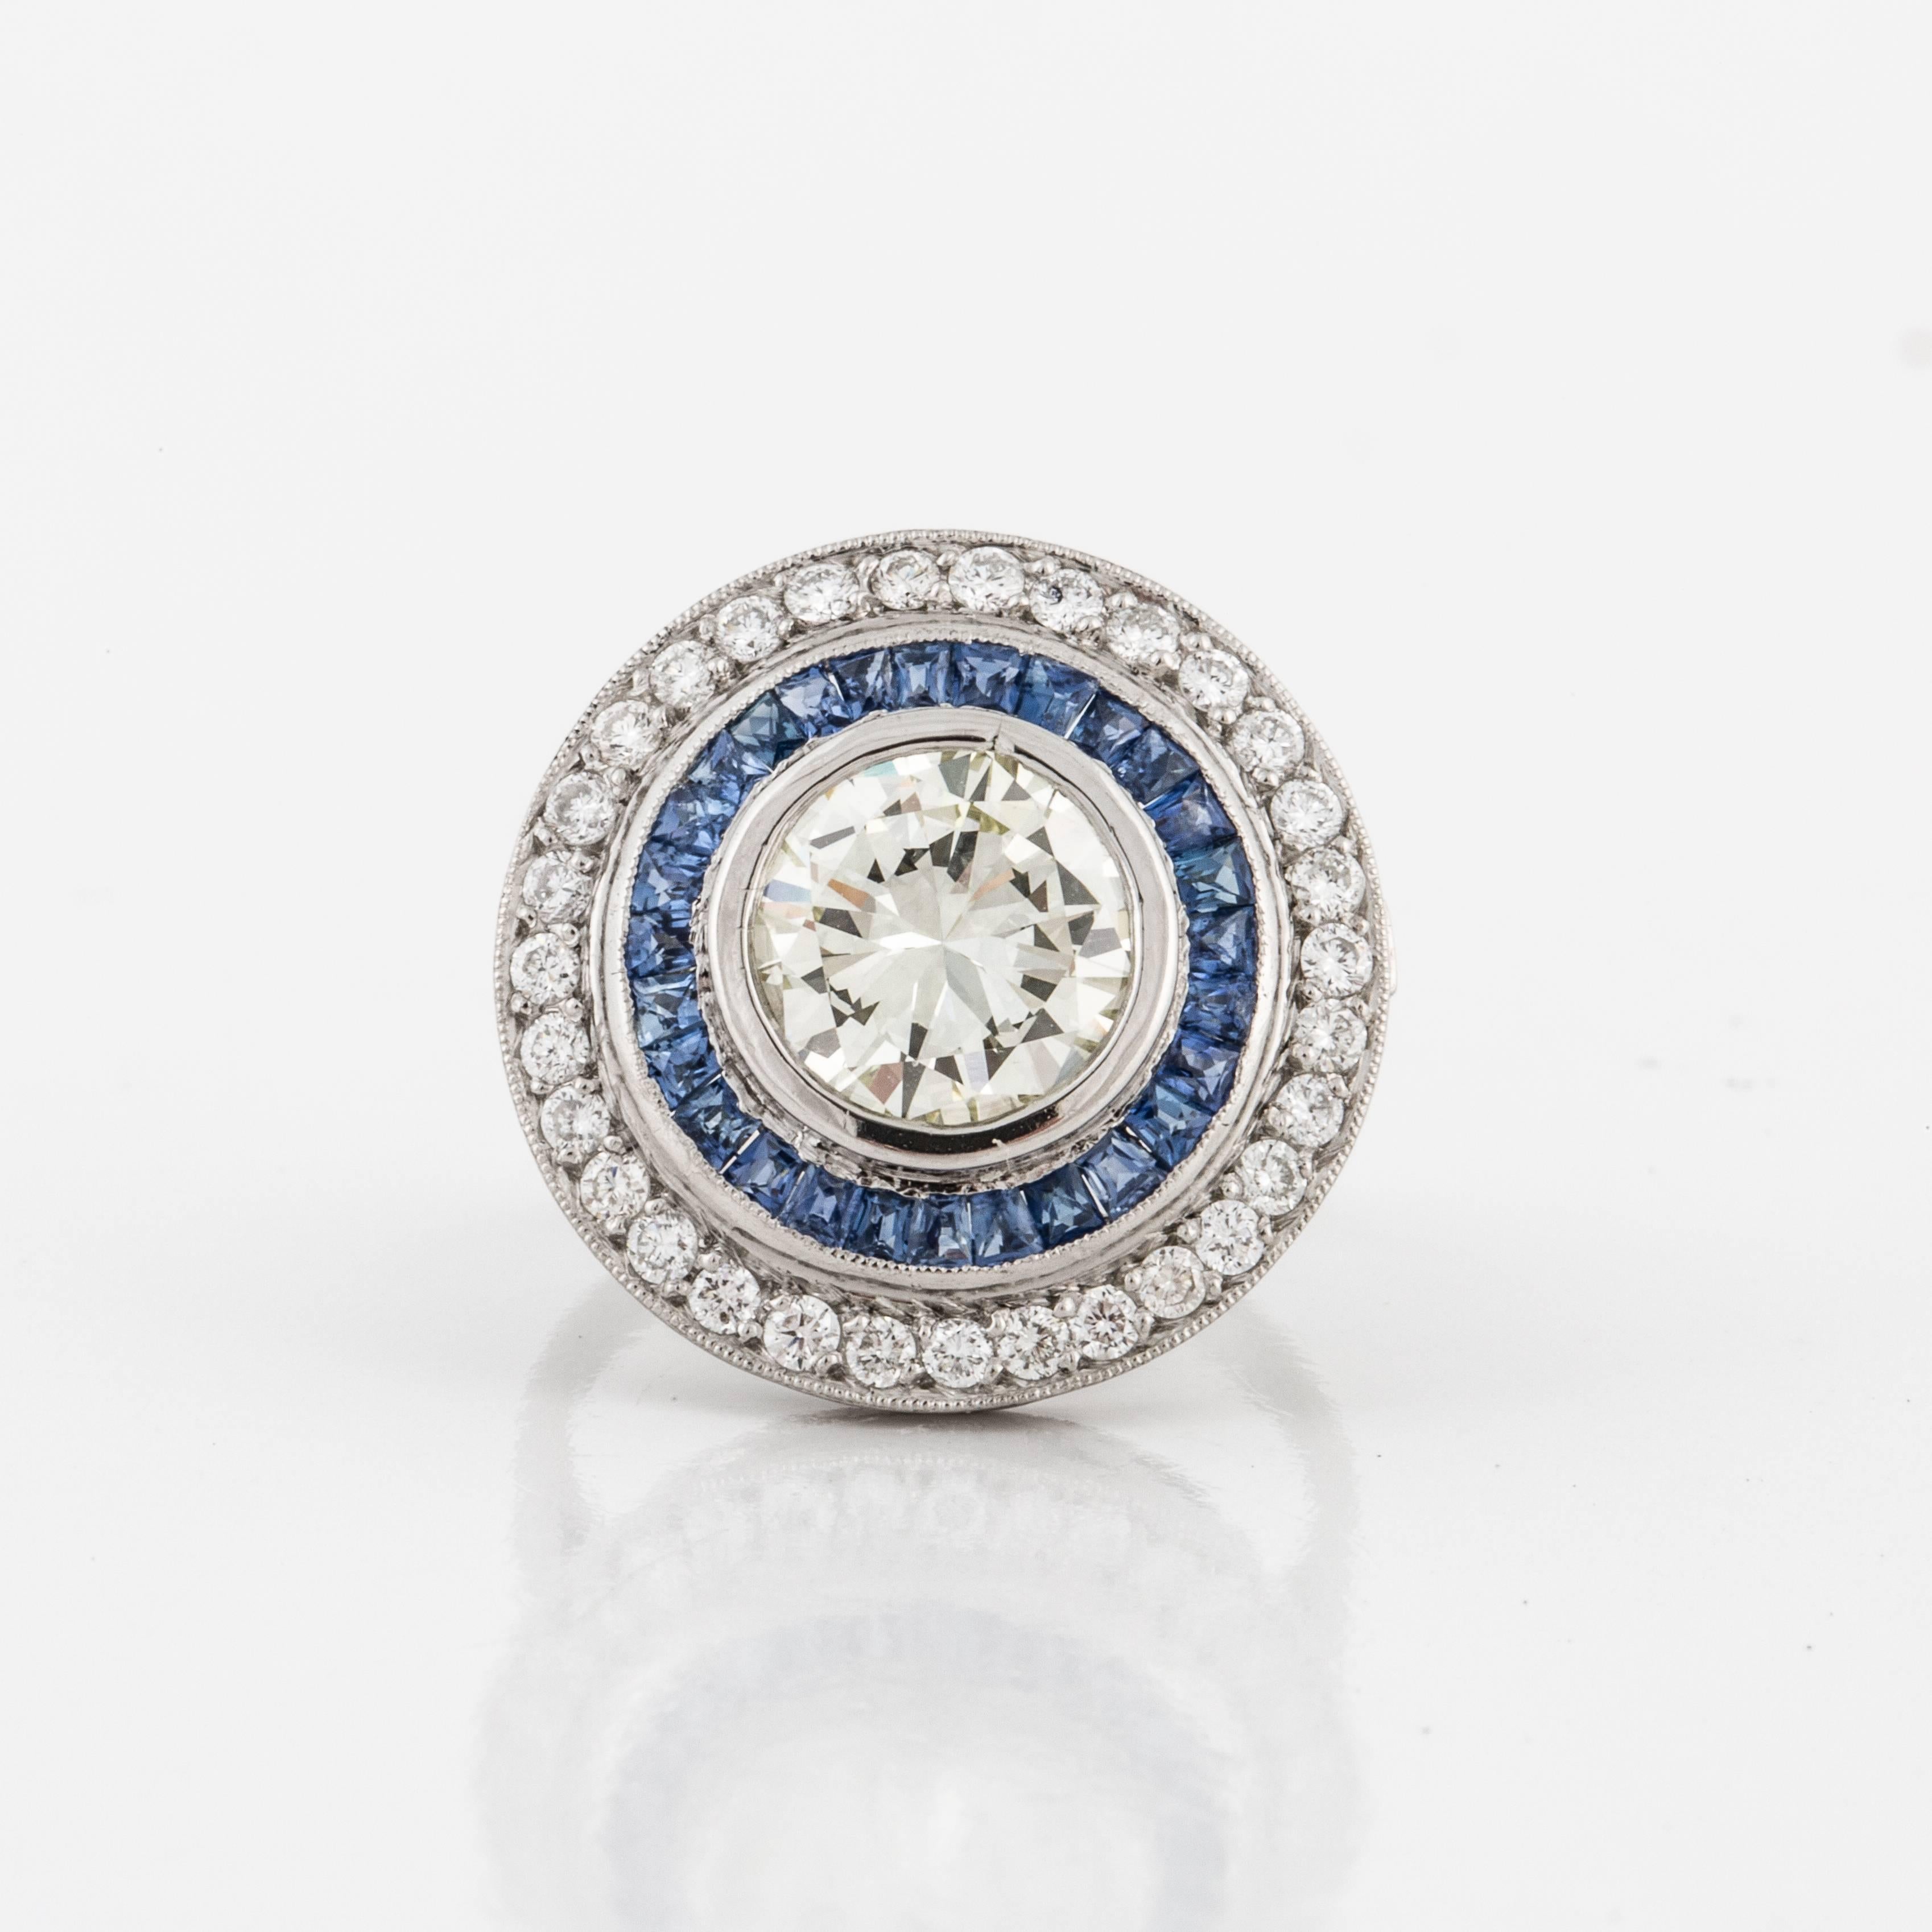 Contemporary target ring composed of platinum with diamonds and sapphires.  The center diamond is a round brilliant-cut, 2.75 carats, M color, and VVS2-VSi1 clarity.  There are 41 round diamonds totaling 0.75 carats, G-H color and VS2-VS1 clarity. 